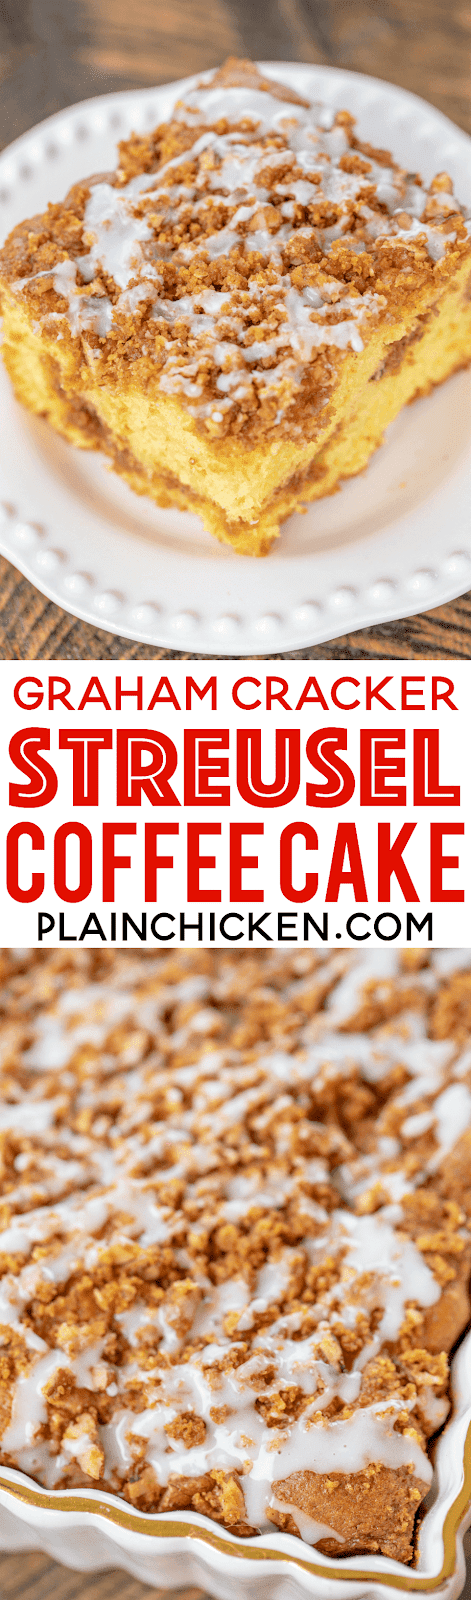 Graham Cracker Streusel Coffee Cake - seriously delicious! SO moist and the streusel topping is to die for! We couldn't resist this yummy cake!! Cake mix, vanilla pudding, sour cream, oil, eggs, vanilla, cinnamon, graham cracker crumbs, brown sugar, pecans and butter. Great for potlucks, tailgating, breakfast, brunch and dessert. #breakfast #cake #dessert #coffeecake